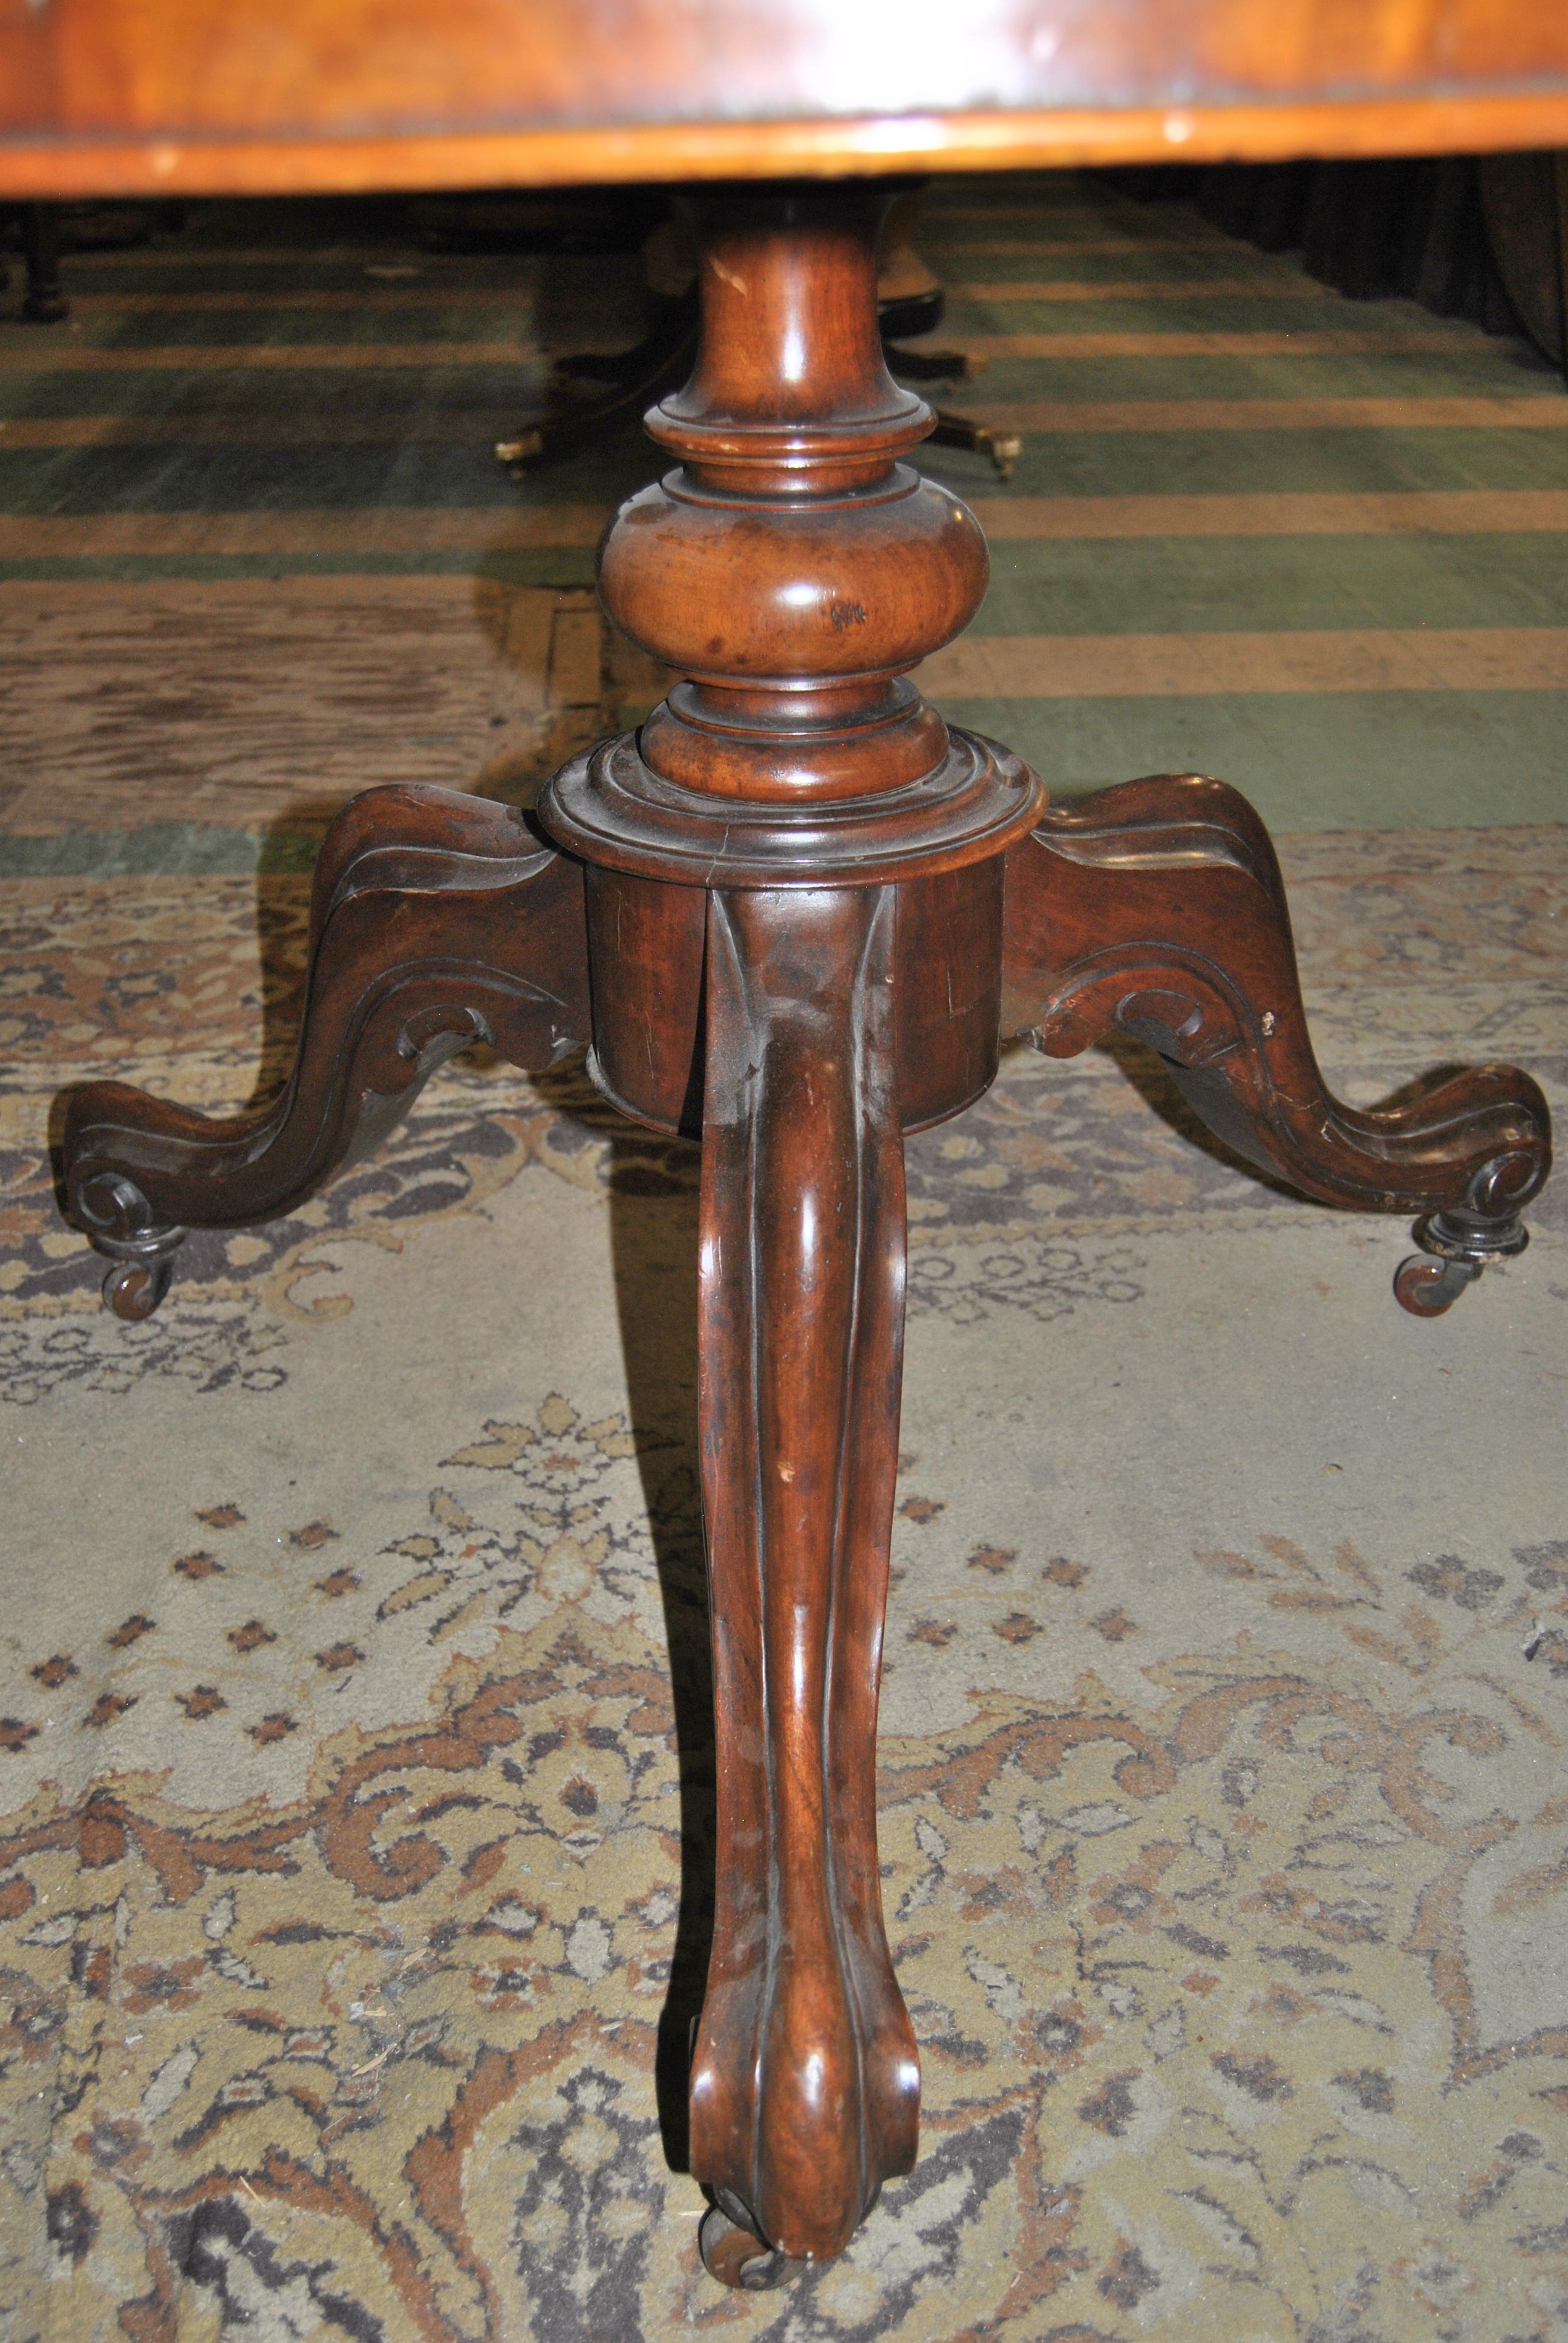 This is a solid mahogany tilt-top table made in England, circa 1860. The round top is a highly figured mahogany with a nicely molded edge. The top sits on a nicely turned pedestal that is supported by 3 carved and shaped down swept Queen Anne legs